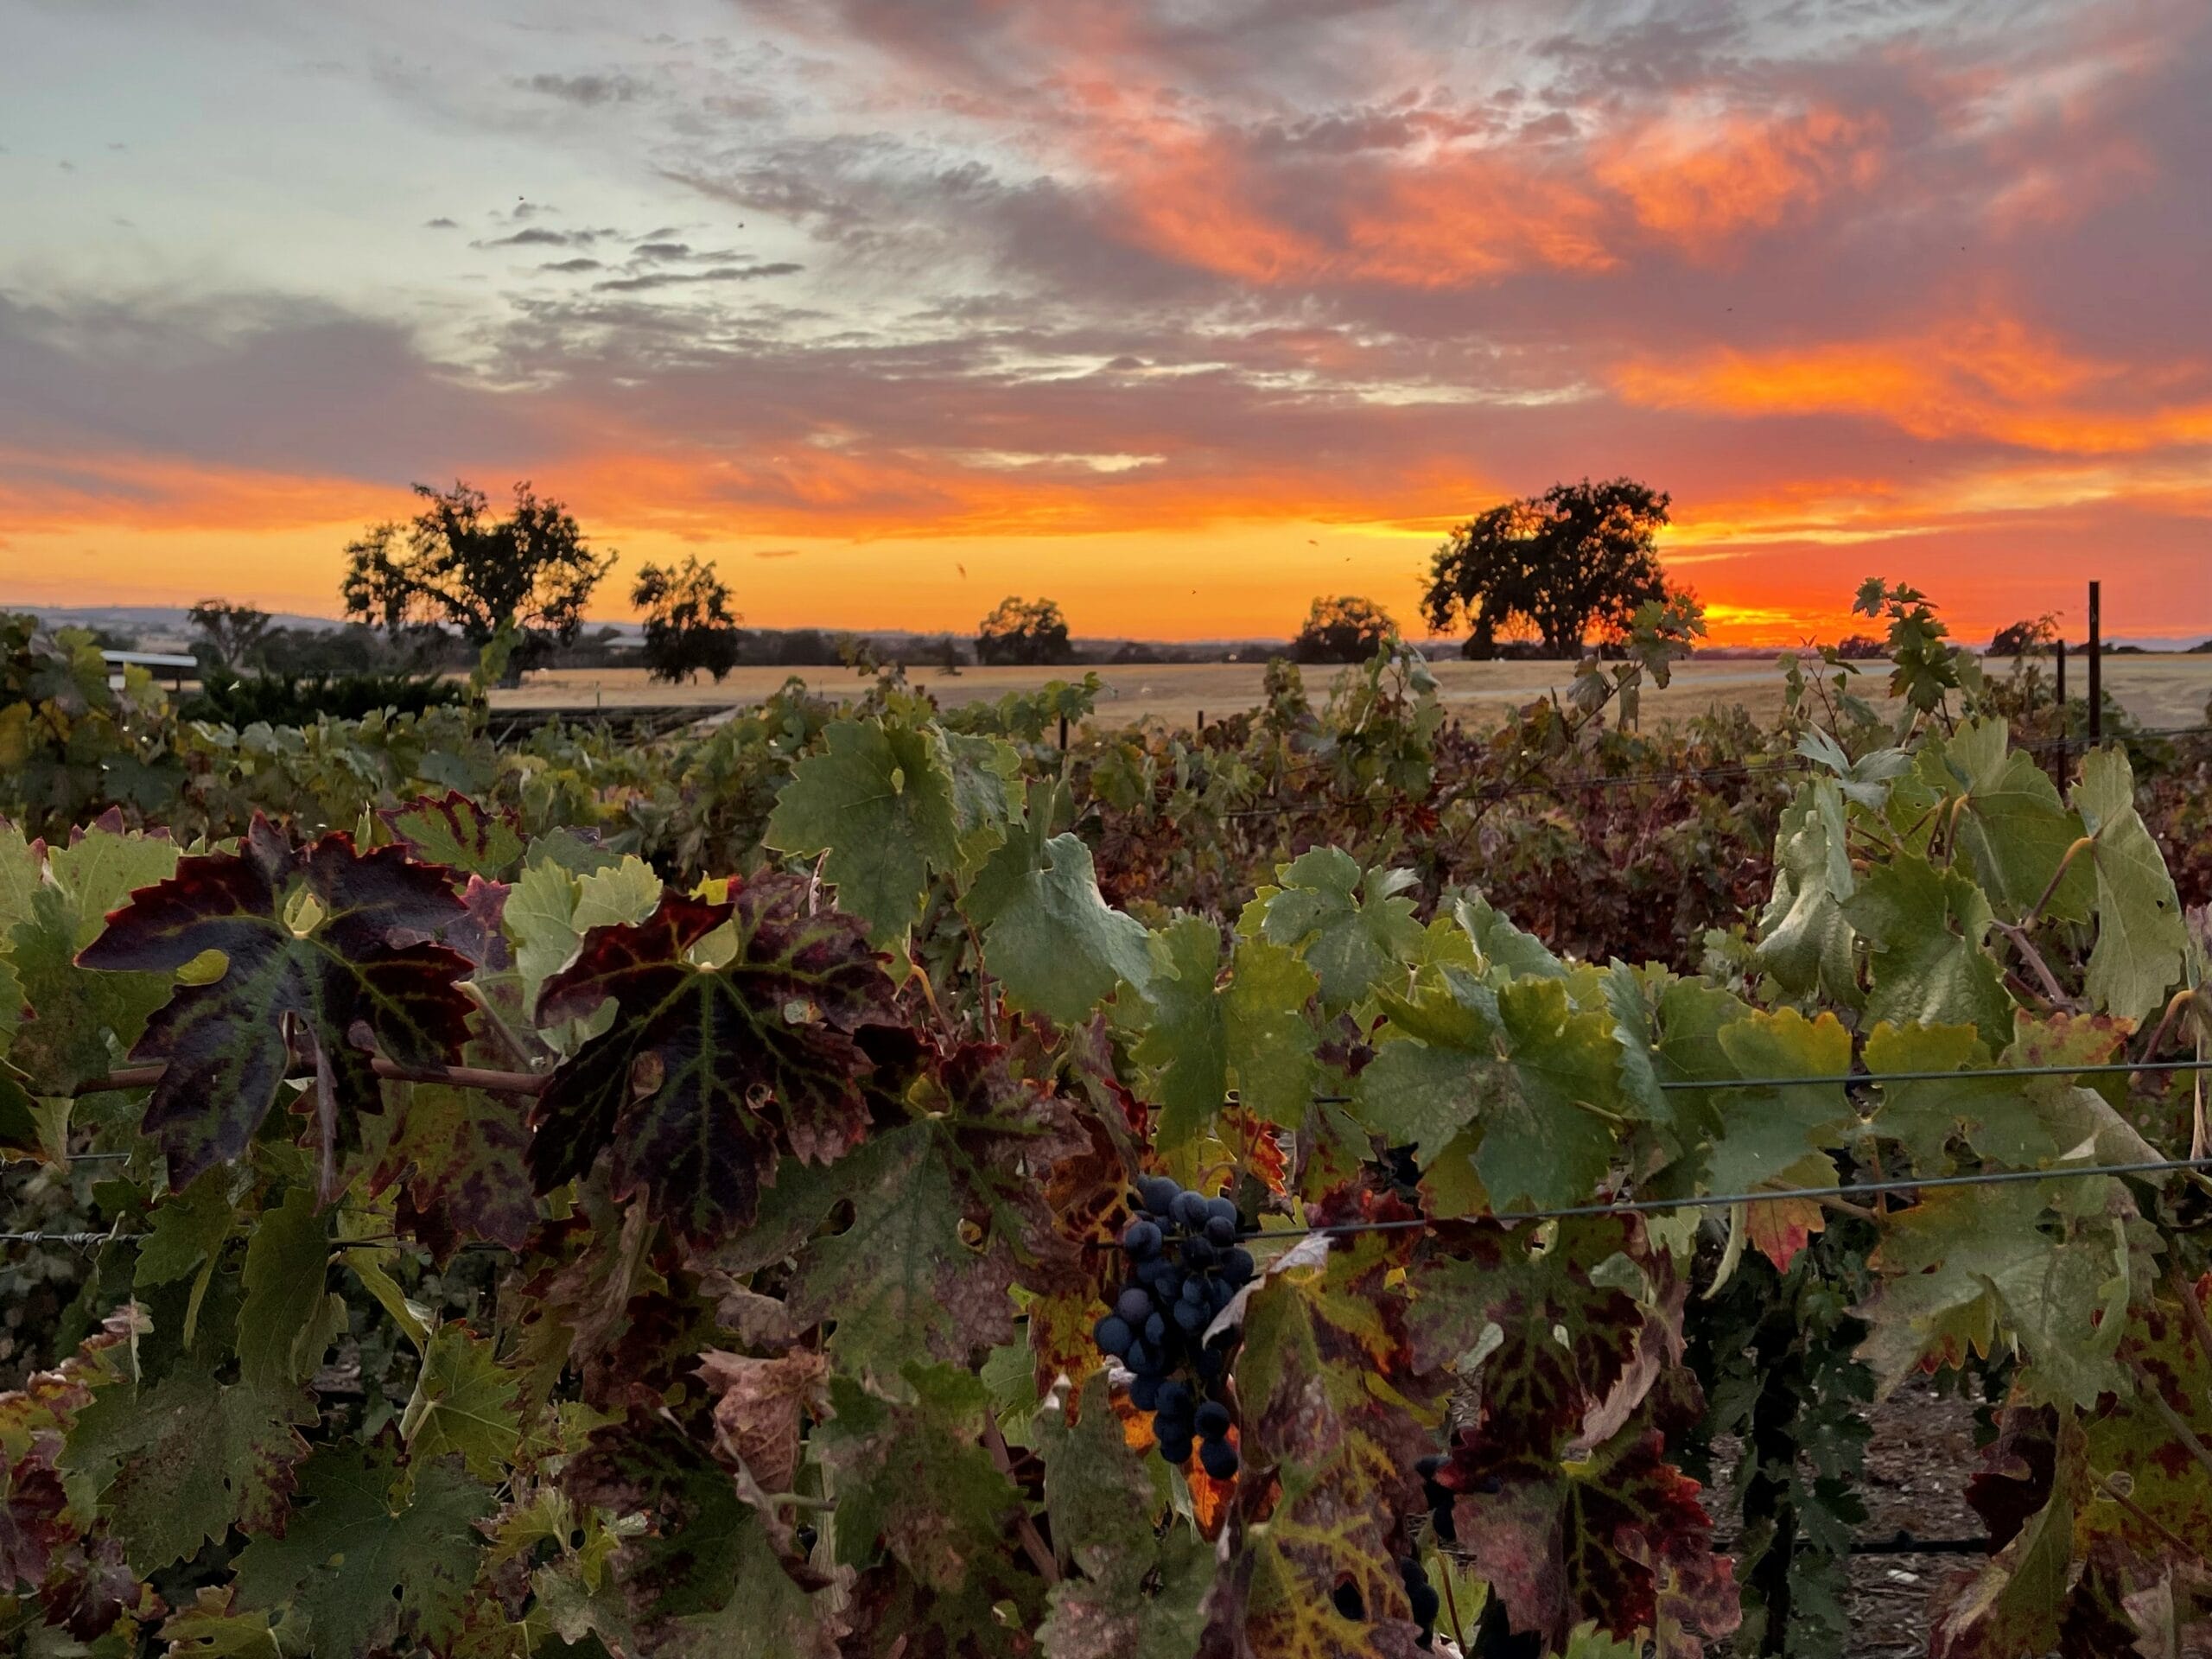 A sunset over a vineyard with vines in the background, perfect for a relaxing vacation rental in Morro Bay or Pismo Beach.